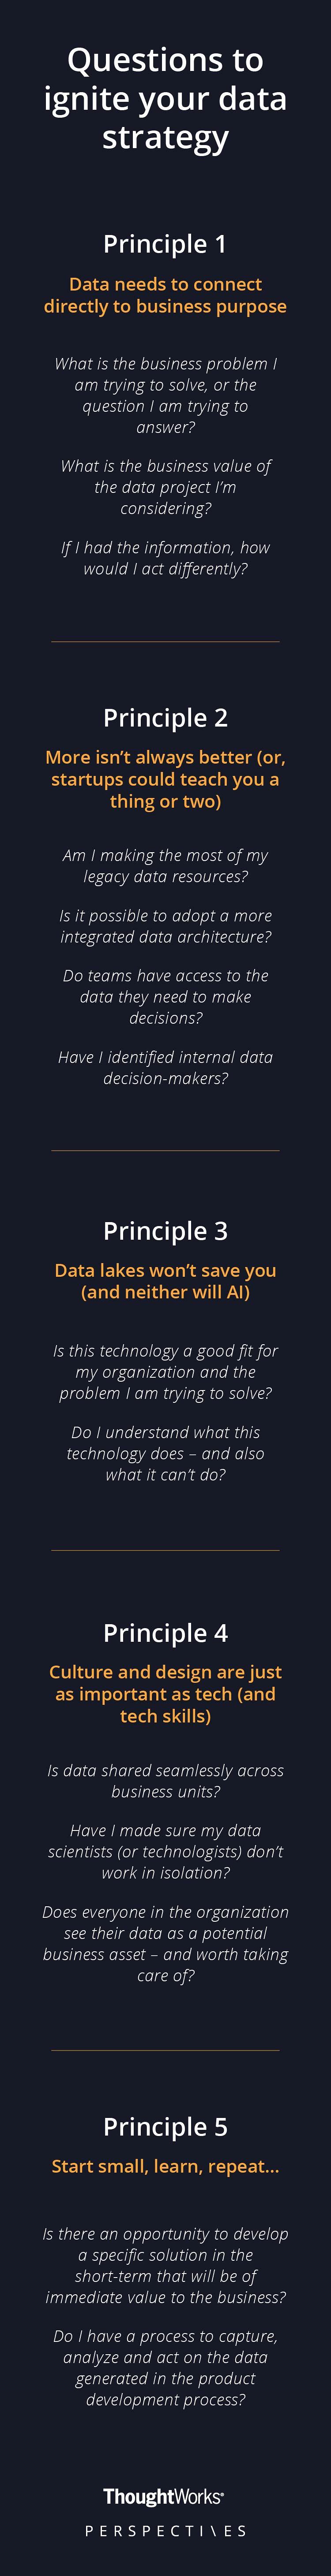 Principle 1: Data needs to connect directly to business purpose | Principle 2: More isn’t always better (or, startups could teach you a thing or two)  |  Principle 3: Data lakes won’t save you (and neither will AI)  |  Principle 4: Culture and design are just as important as tech (and tech skills) | Principle 5: Start small, learn, repeat … 